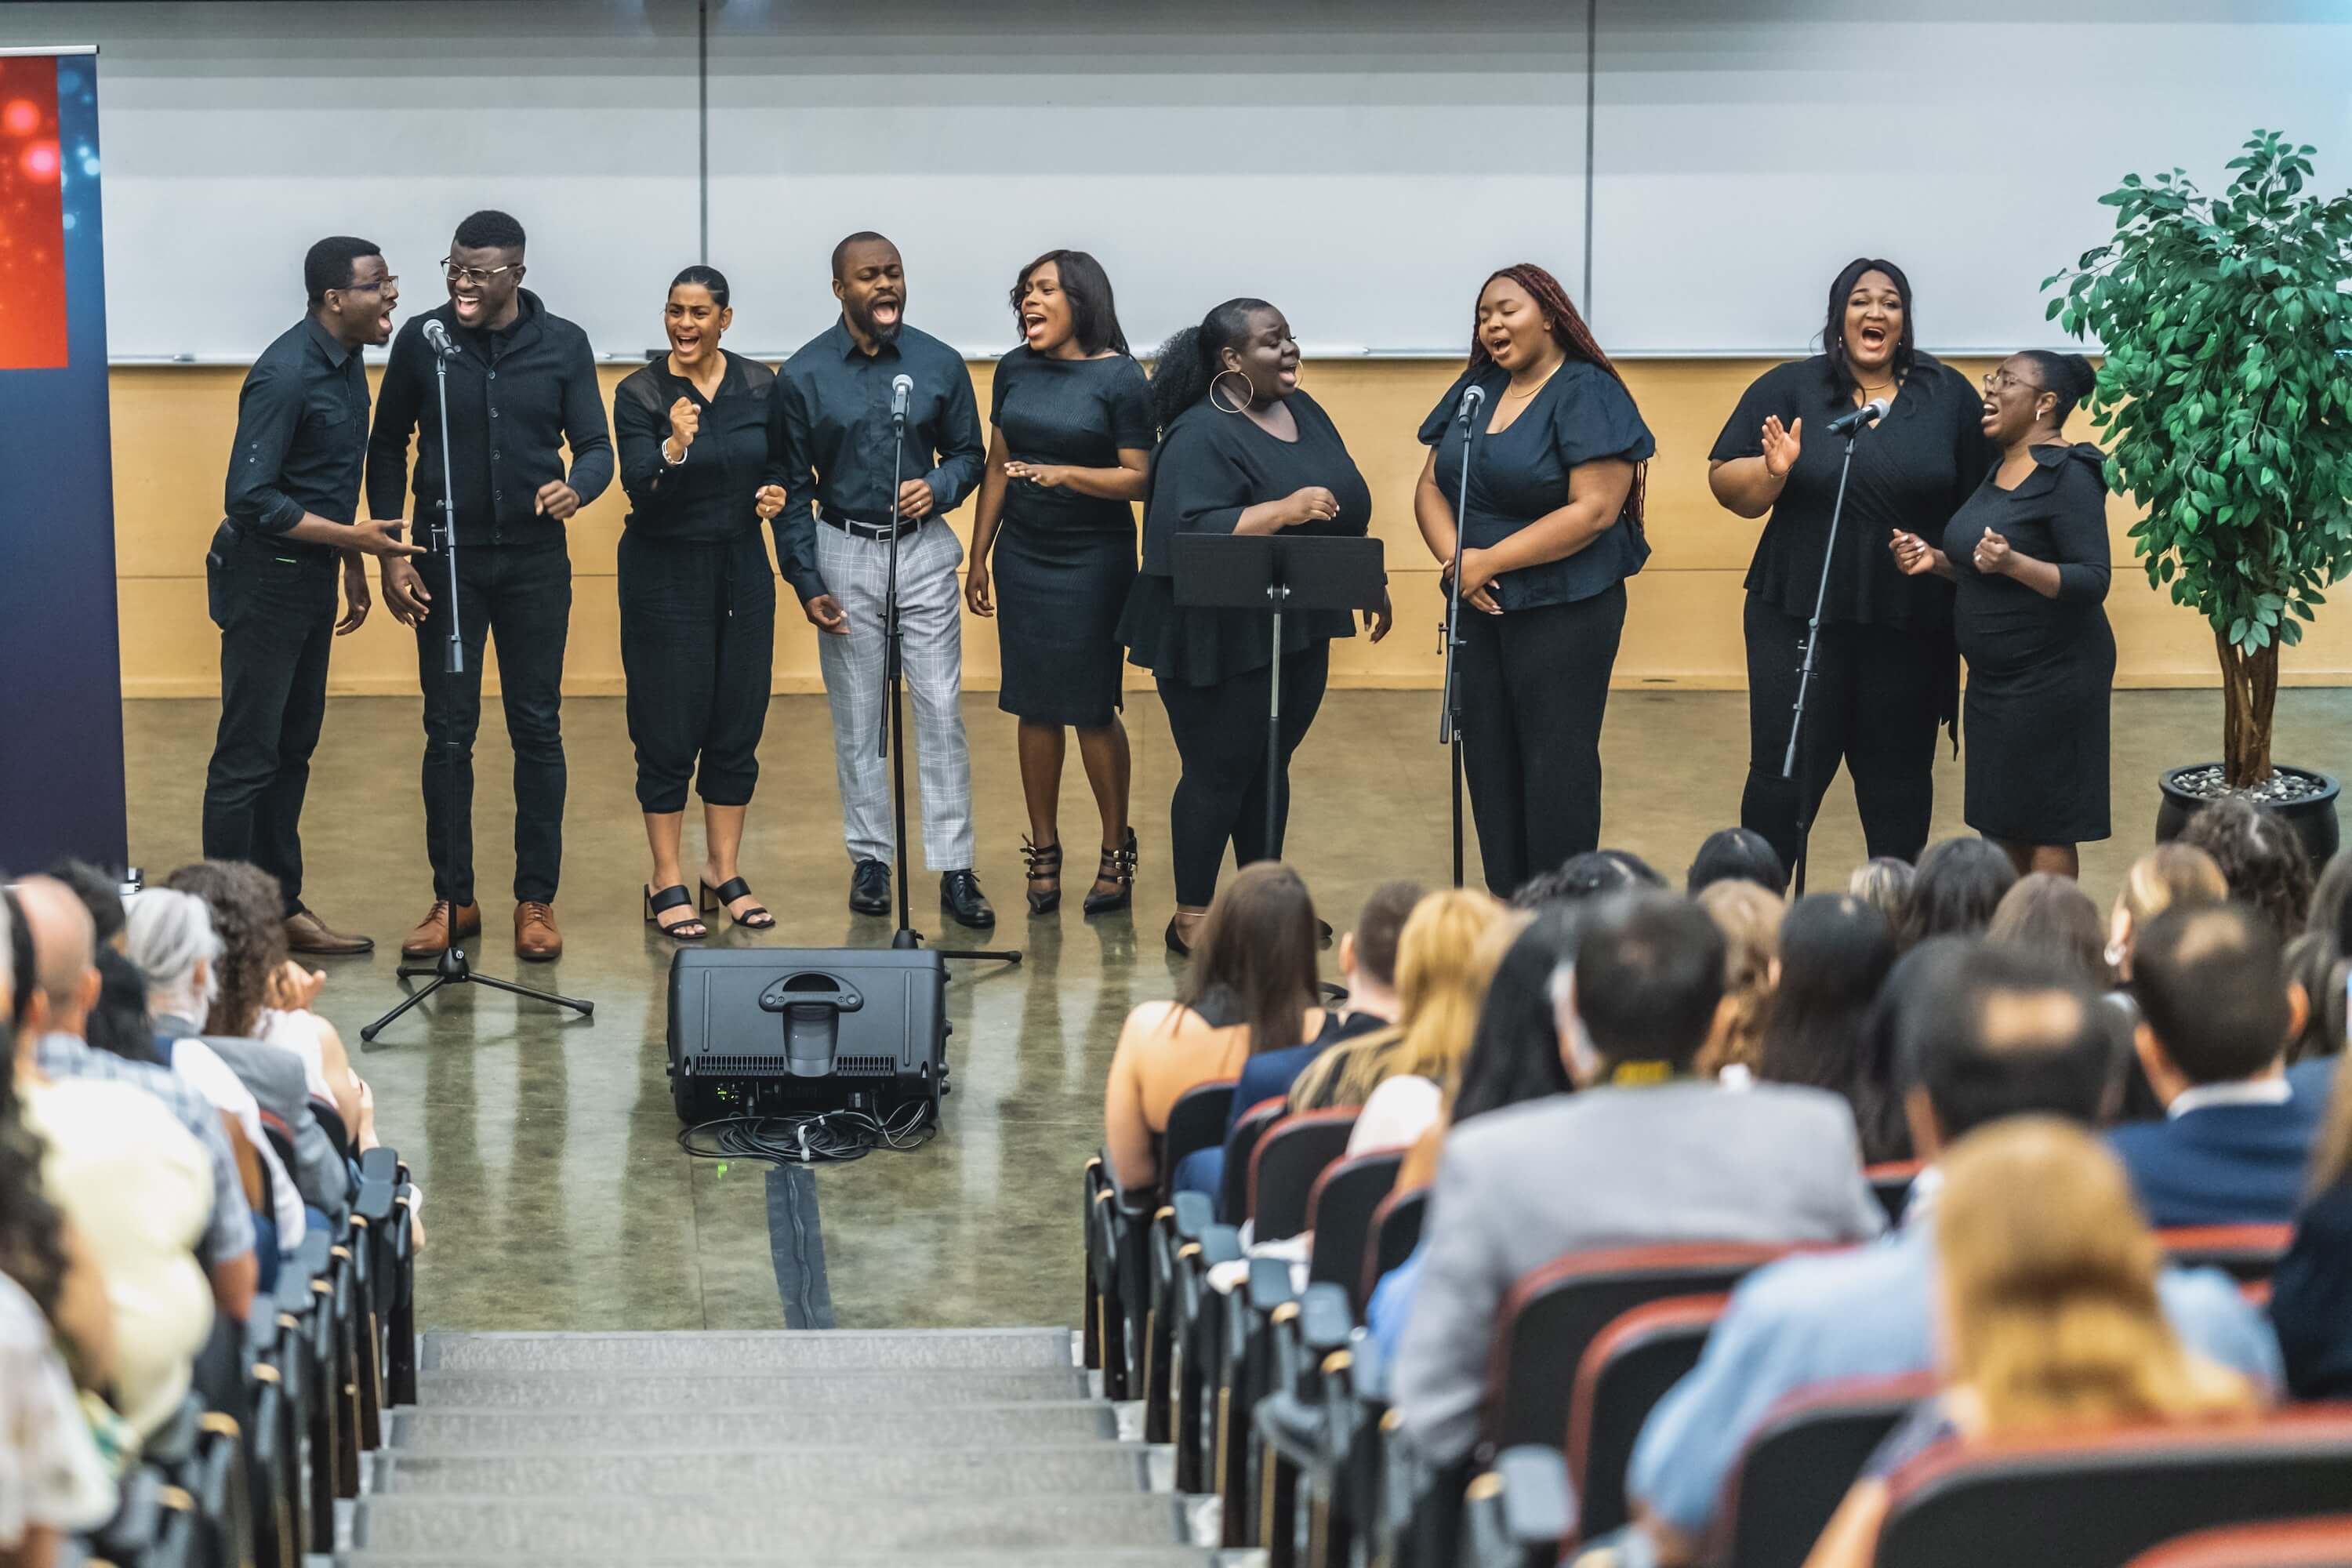 A group of singers dressed in black singing in front of a crowd of people in an auditorium.